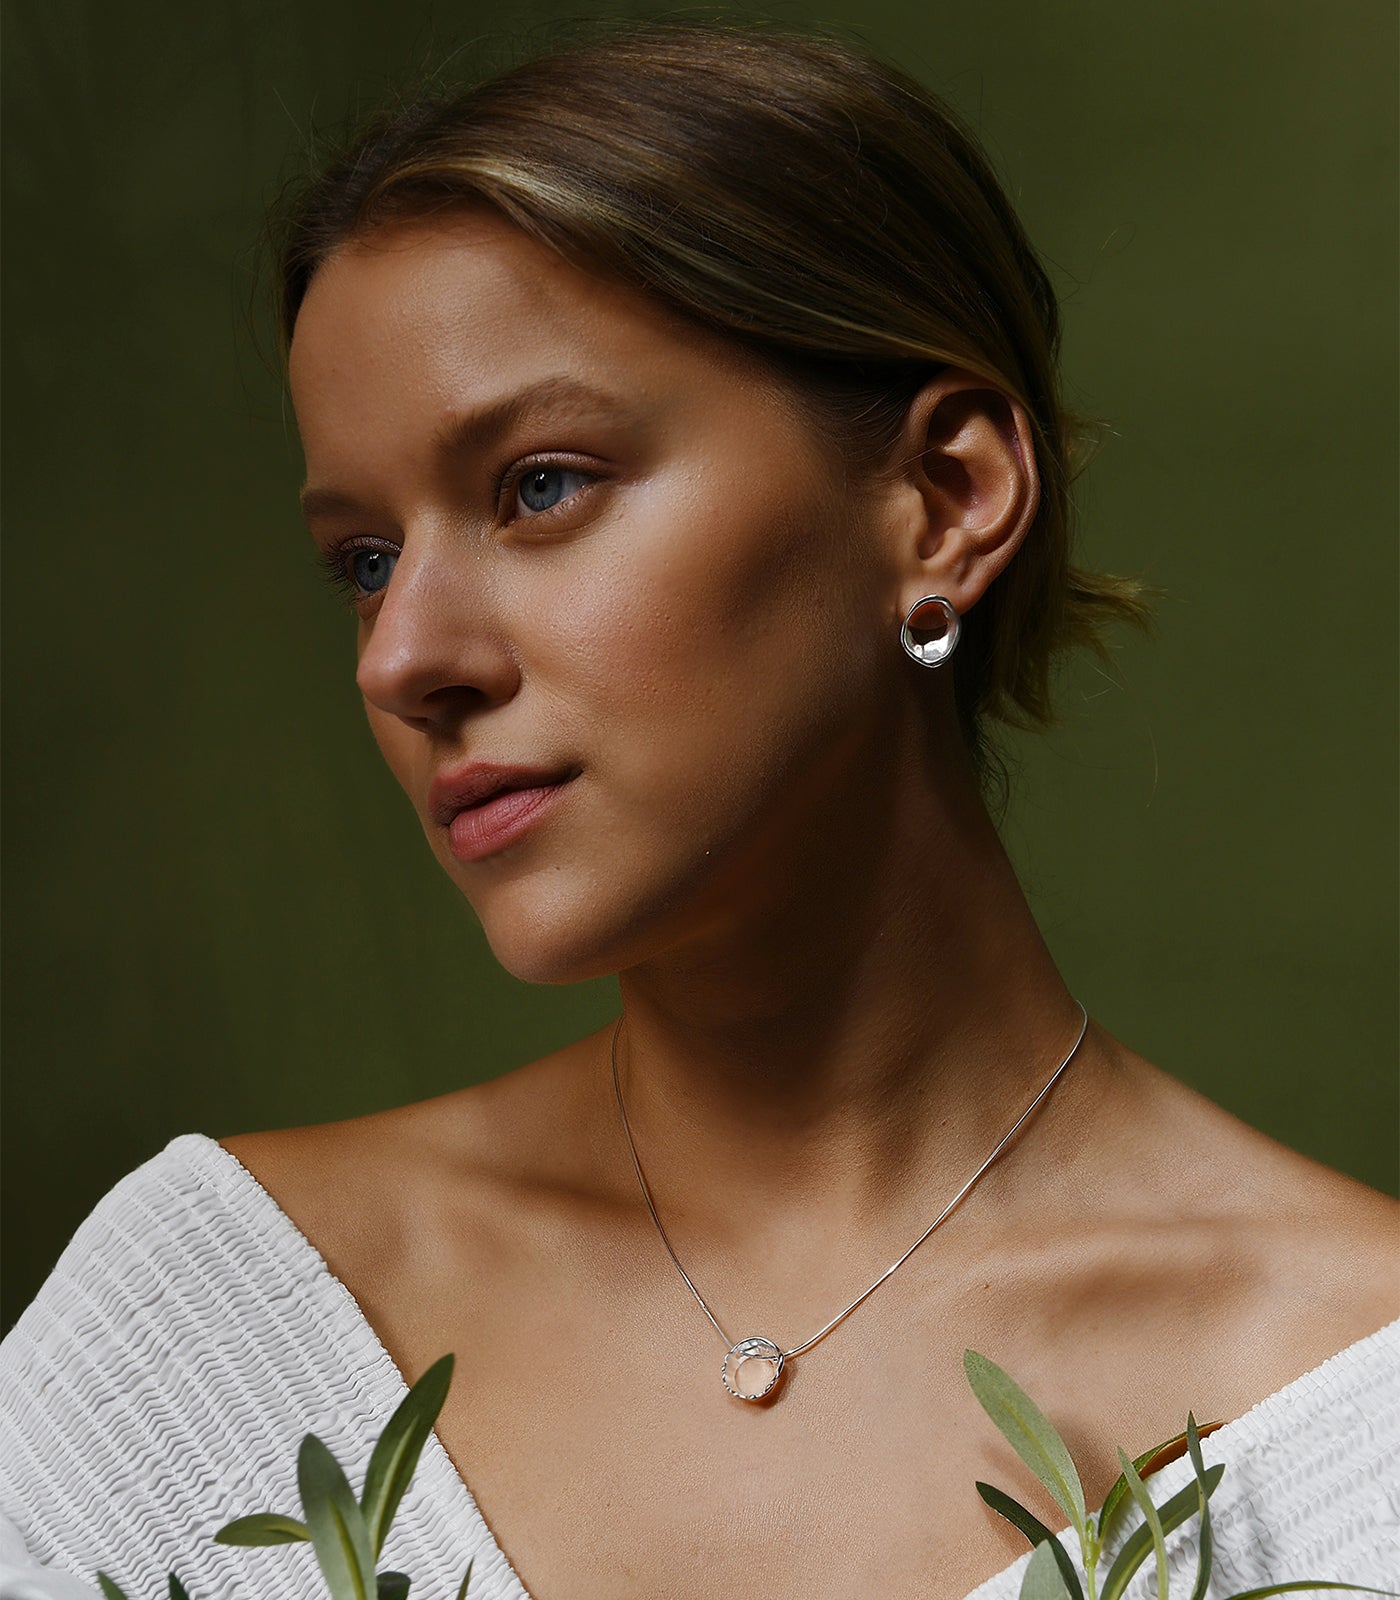 A model wears a pair of sterling silver circle stud earrings. The earrings have an irregular shape resembling waters movement.